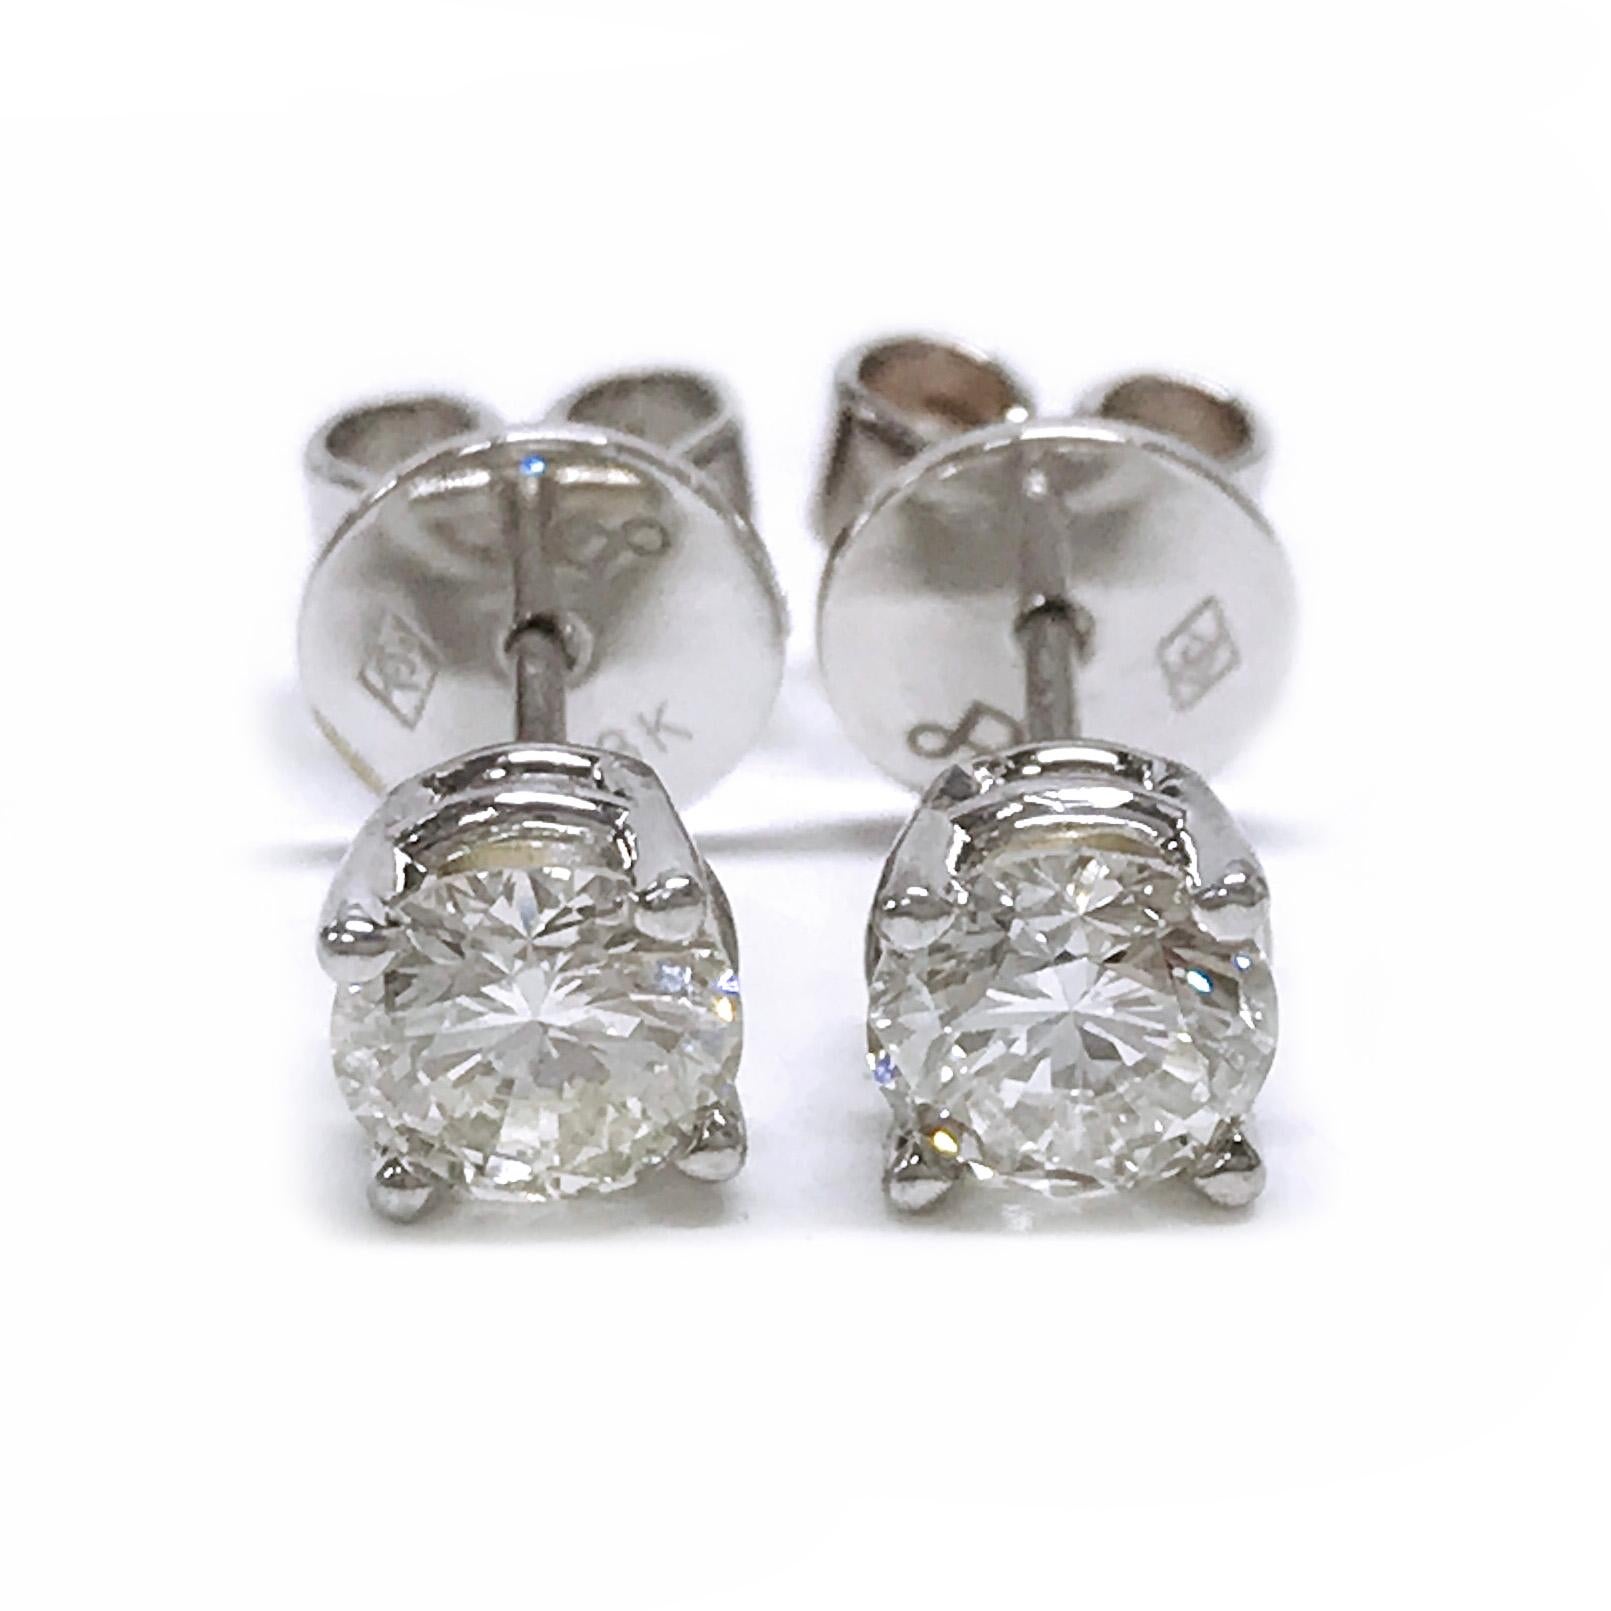 Beautiful timeless 18 Karat Brilliant-Cut Diamond Stud Earrings. The studs are four prong-set on a basket setting. The diamond studs measure 4.8mm each for an approximate total carat weight of 0.80ctw. The diamonds are SI2 (G.I.A.) in clarity and